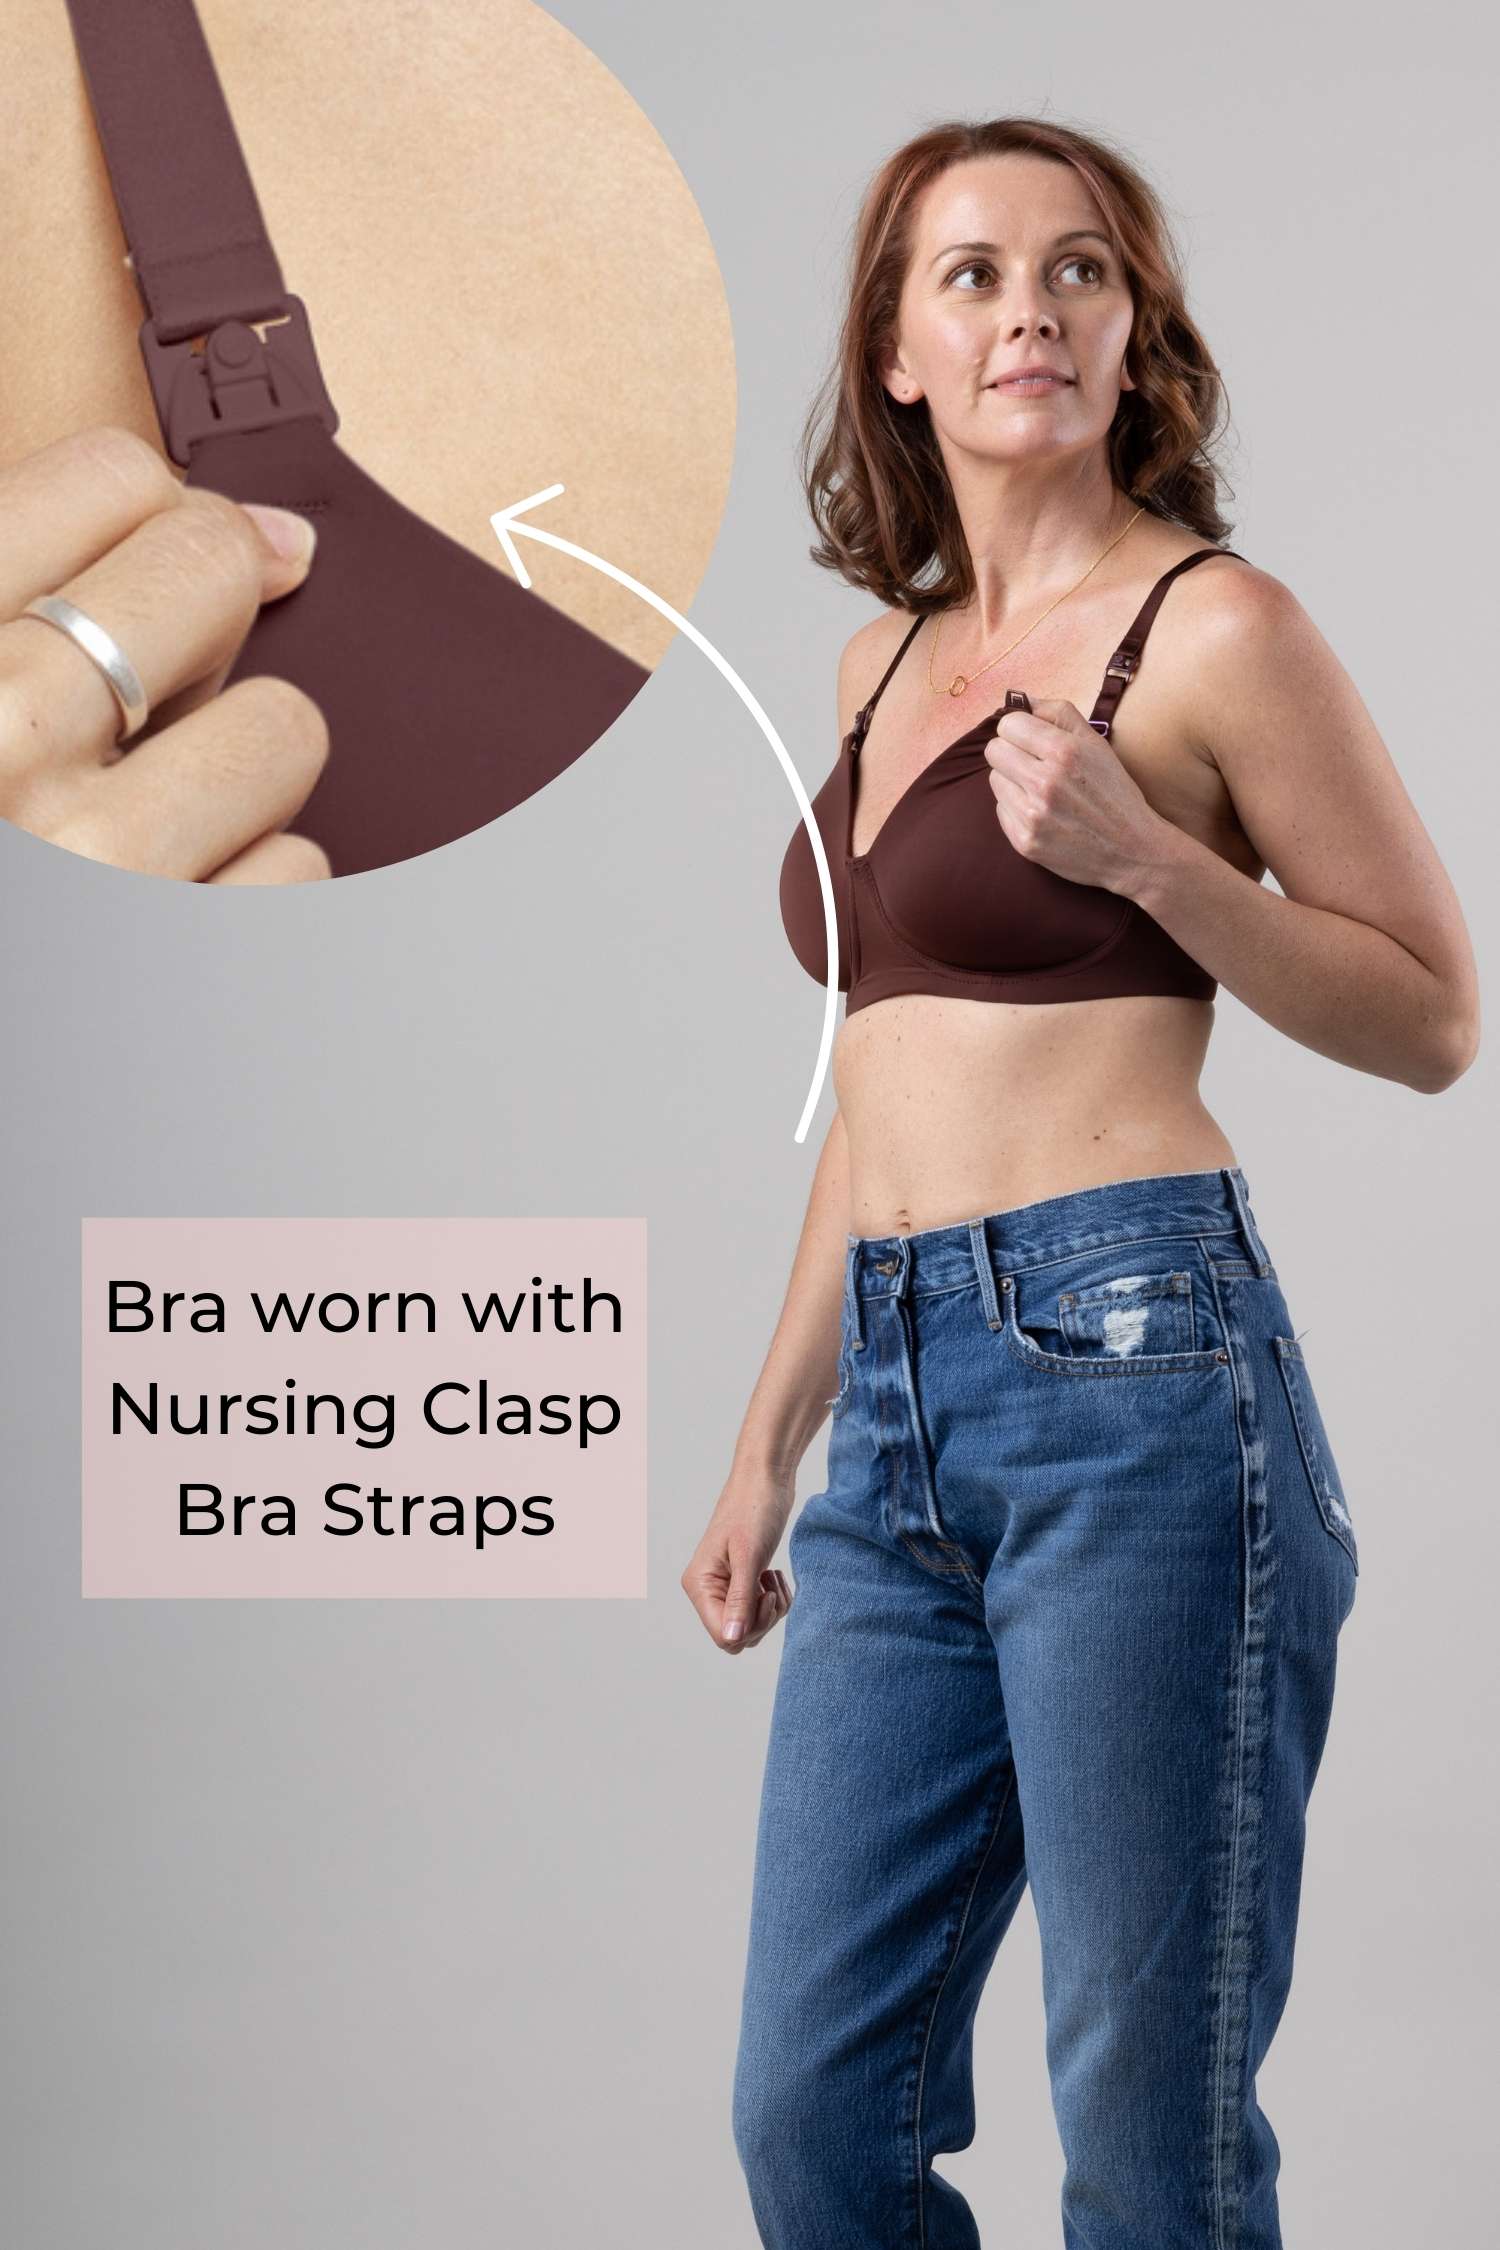 Undercover Nursing T-Shirt Bra in bitter chocolate with one cup pulled down to show easy one hand function of nursing clasp for breastfeeding. Also close up view of nursing clasp.